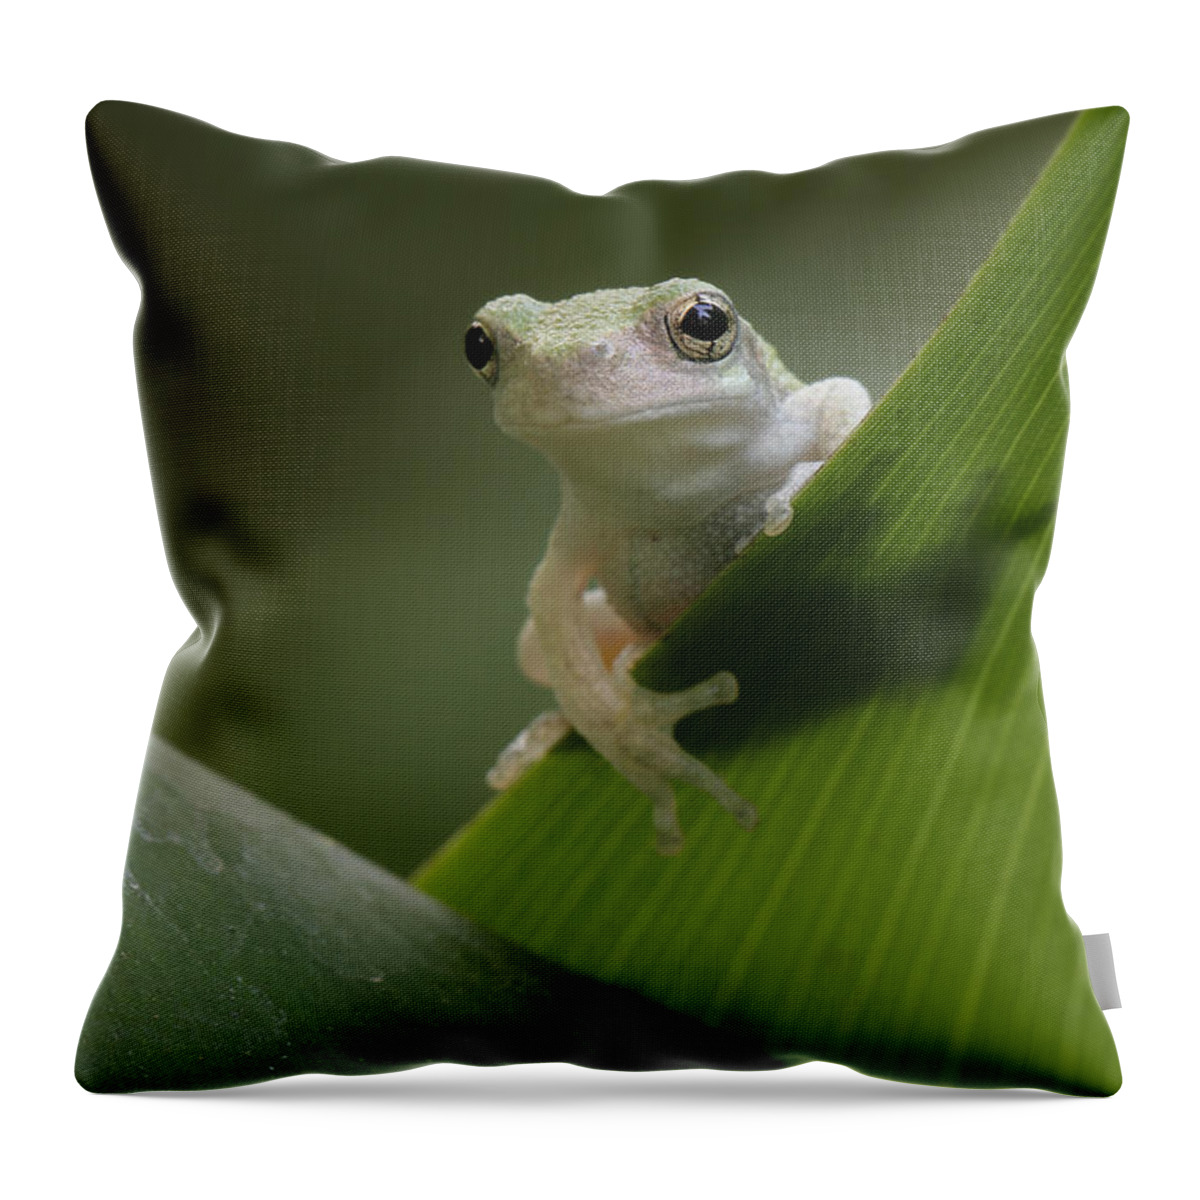 Grey Treefrog Throw Pillow featuring the photograph Juvenile Grey Treefrog by Daniel Reed